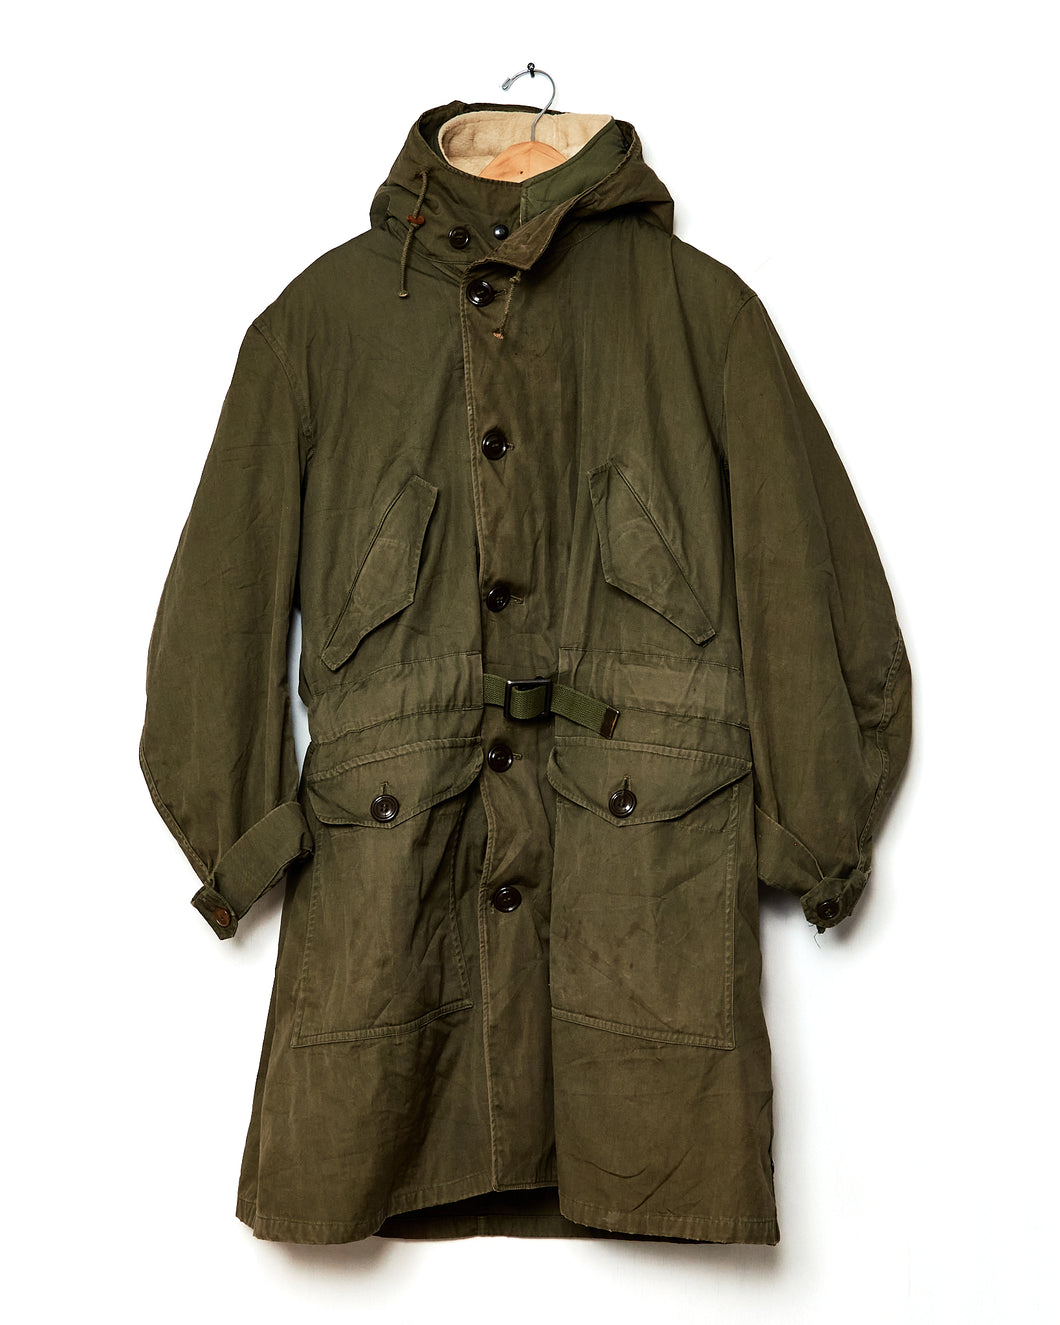 1940s M47 US Army Overcoat Parka w/ Liner